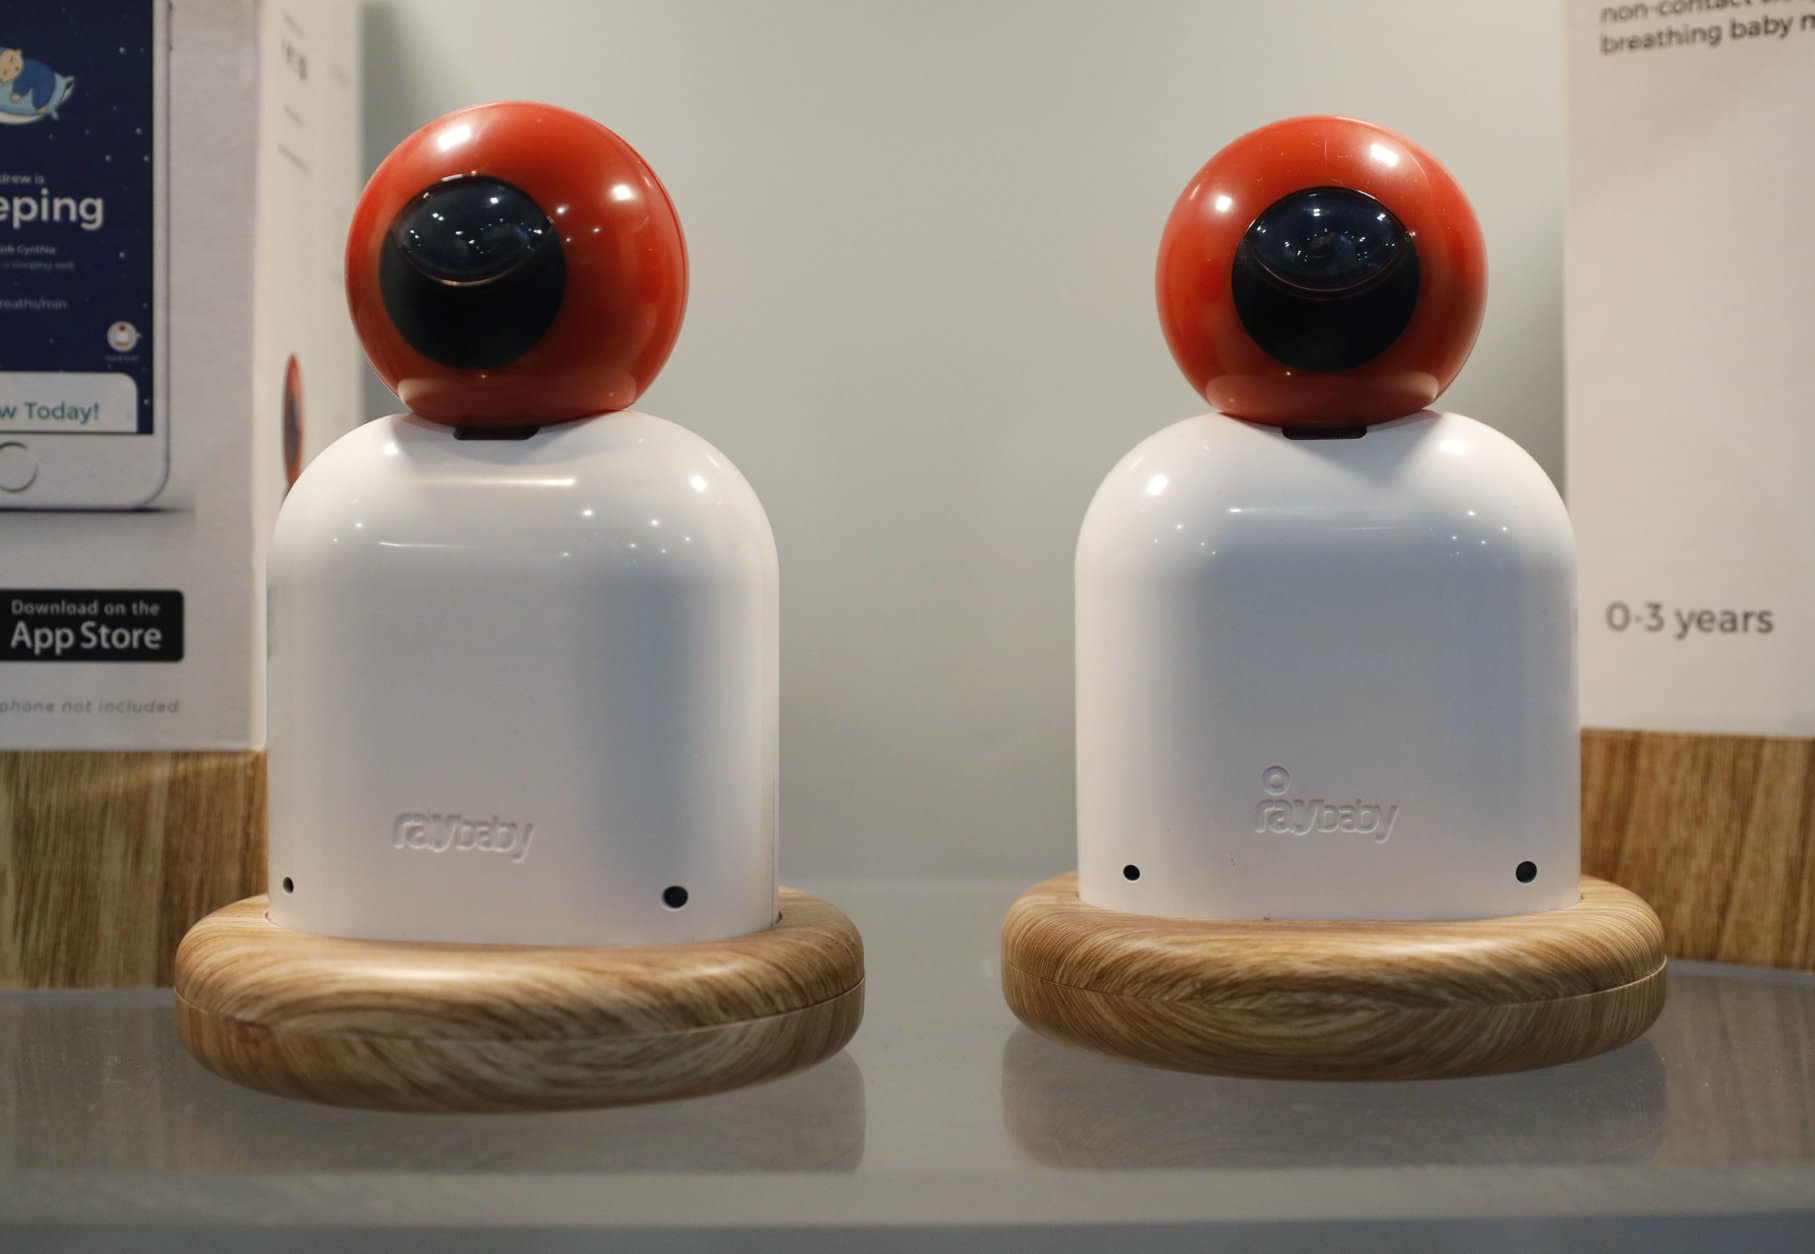 Raybaby baby sleep and breathing monitors are on display at the Raybaby booth at CES International, Wednesday, Jan. 9, 2019, in Las Vegas. (AP Photo/John Locher)